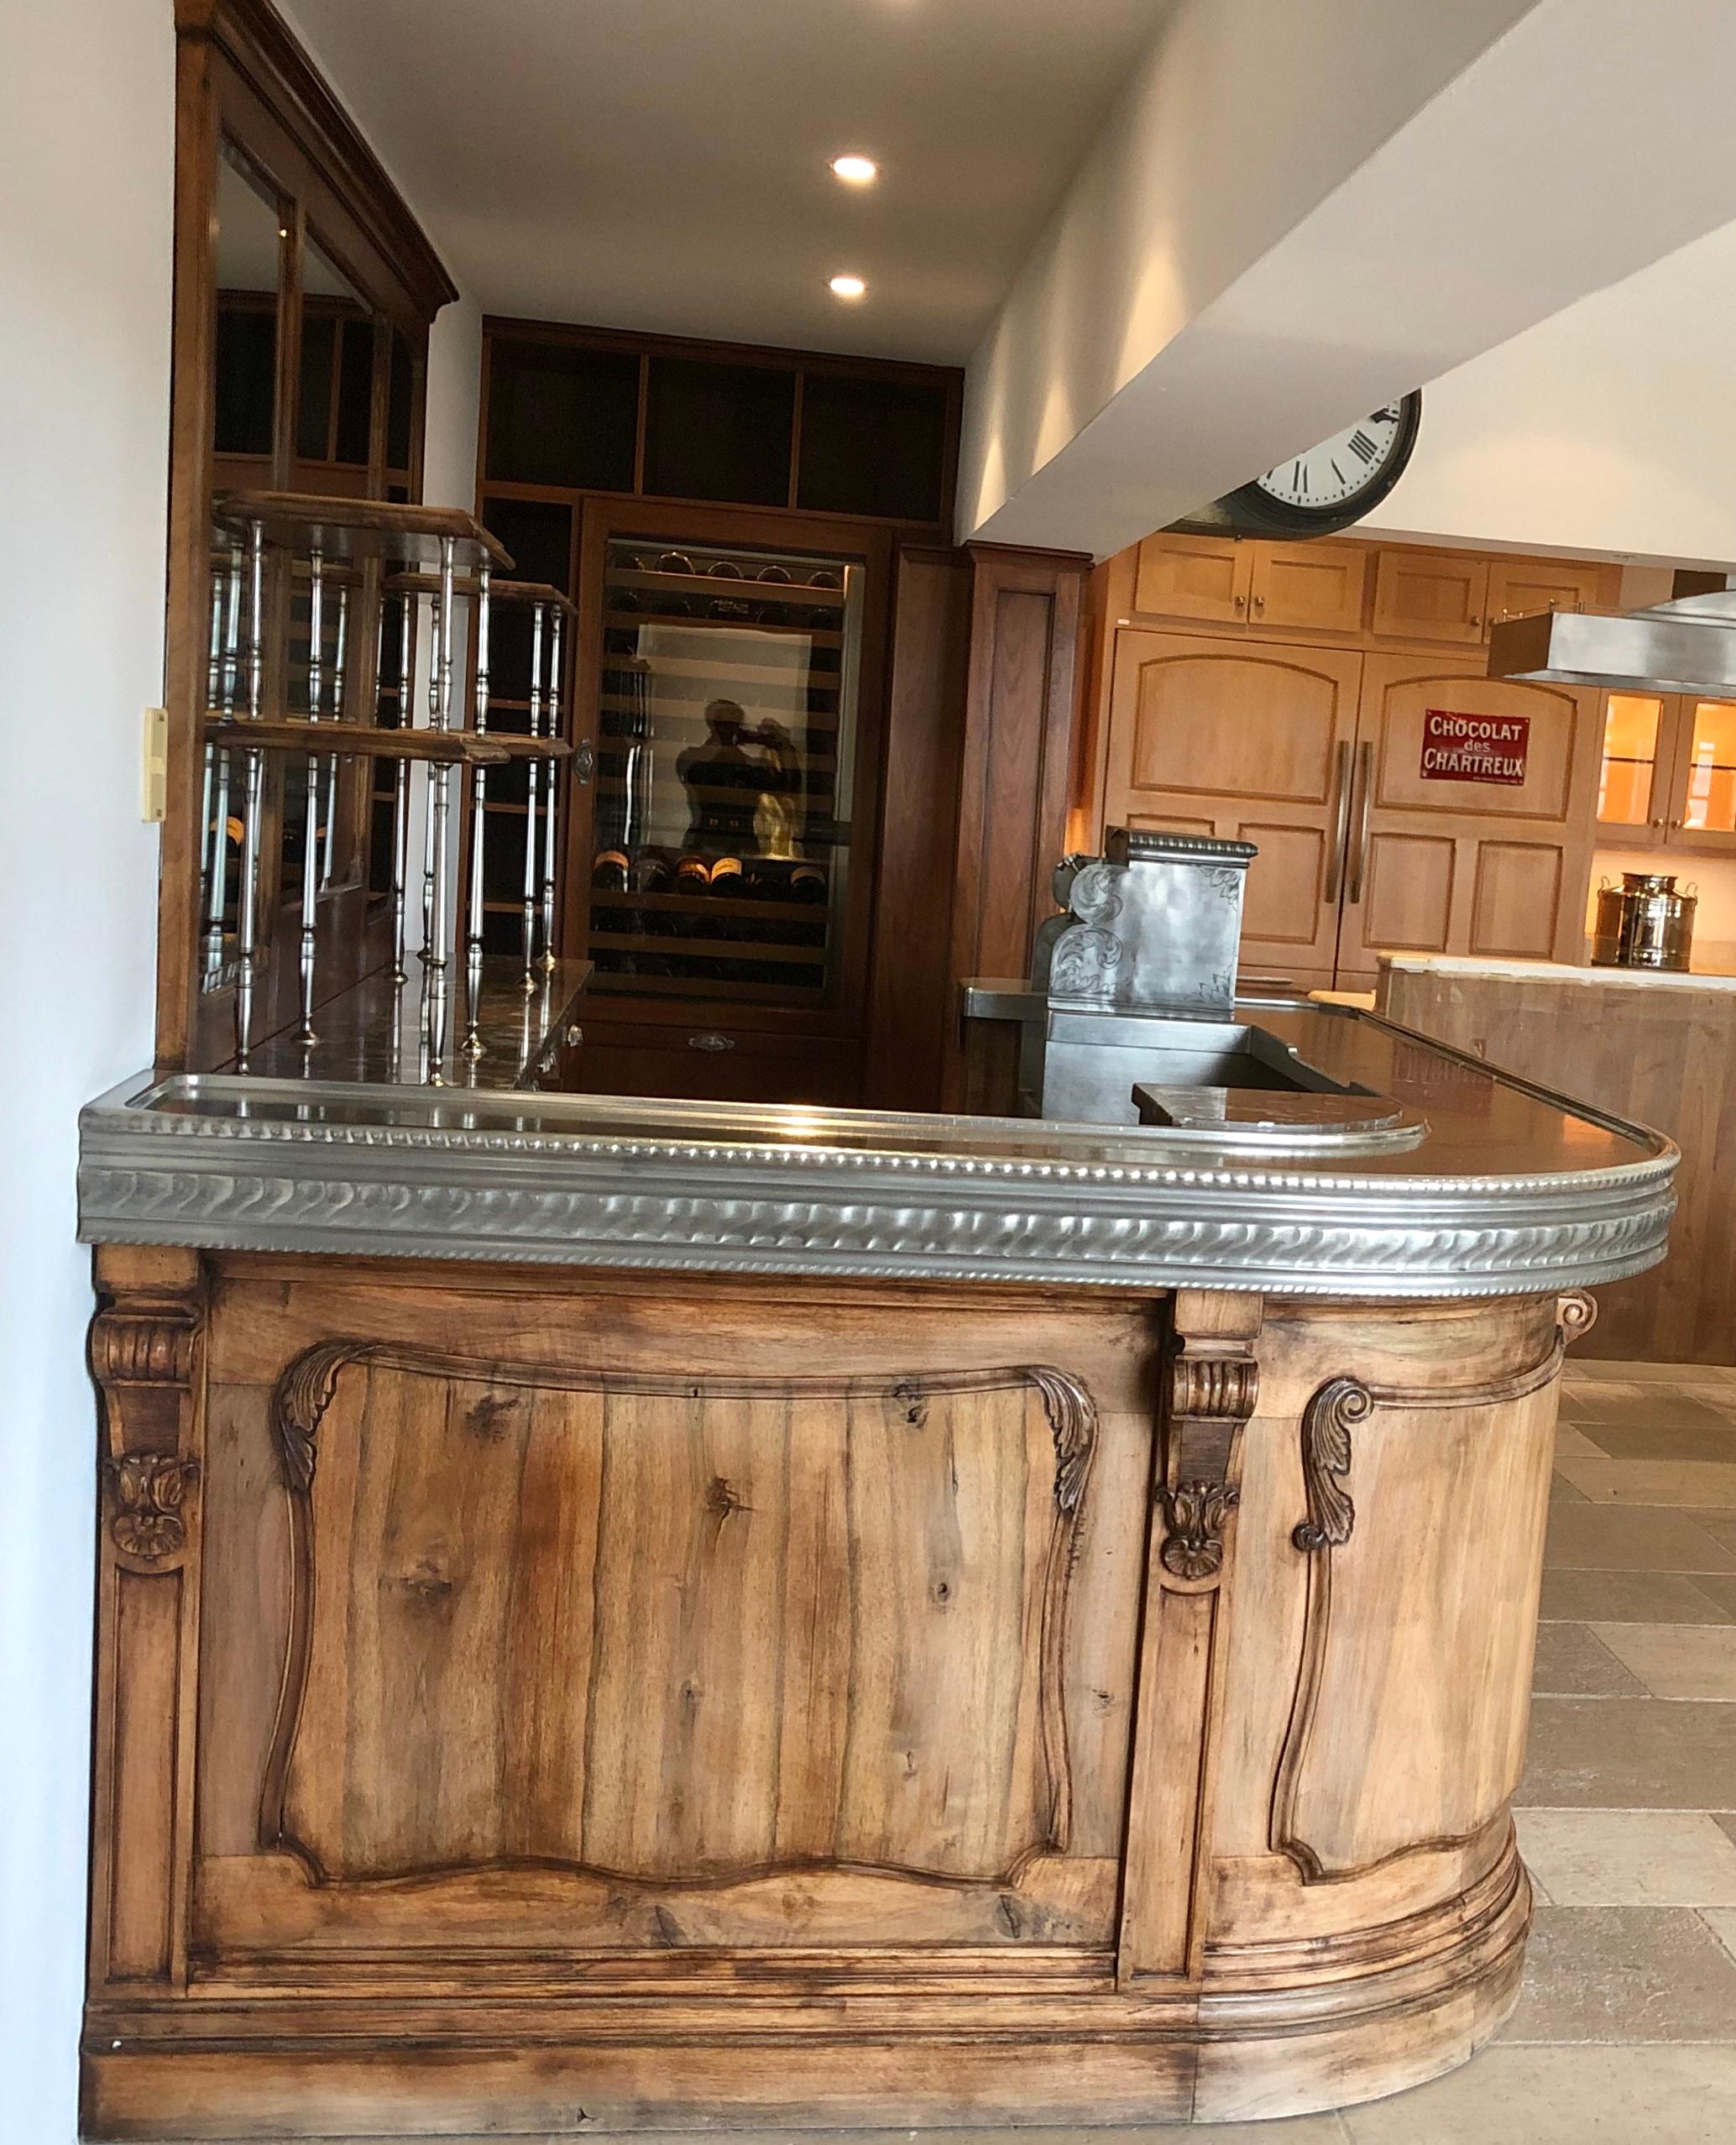 An authentic bar from Paris, France, circa 1940s.
The name of the bar was L. Wiemert and it was located on 54
Rodelar Folier Regnault & 45 bis Paris.
The pewter bar top is priceless. The back bar top is made of a marble. All the drawers are